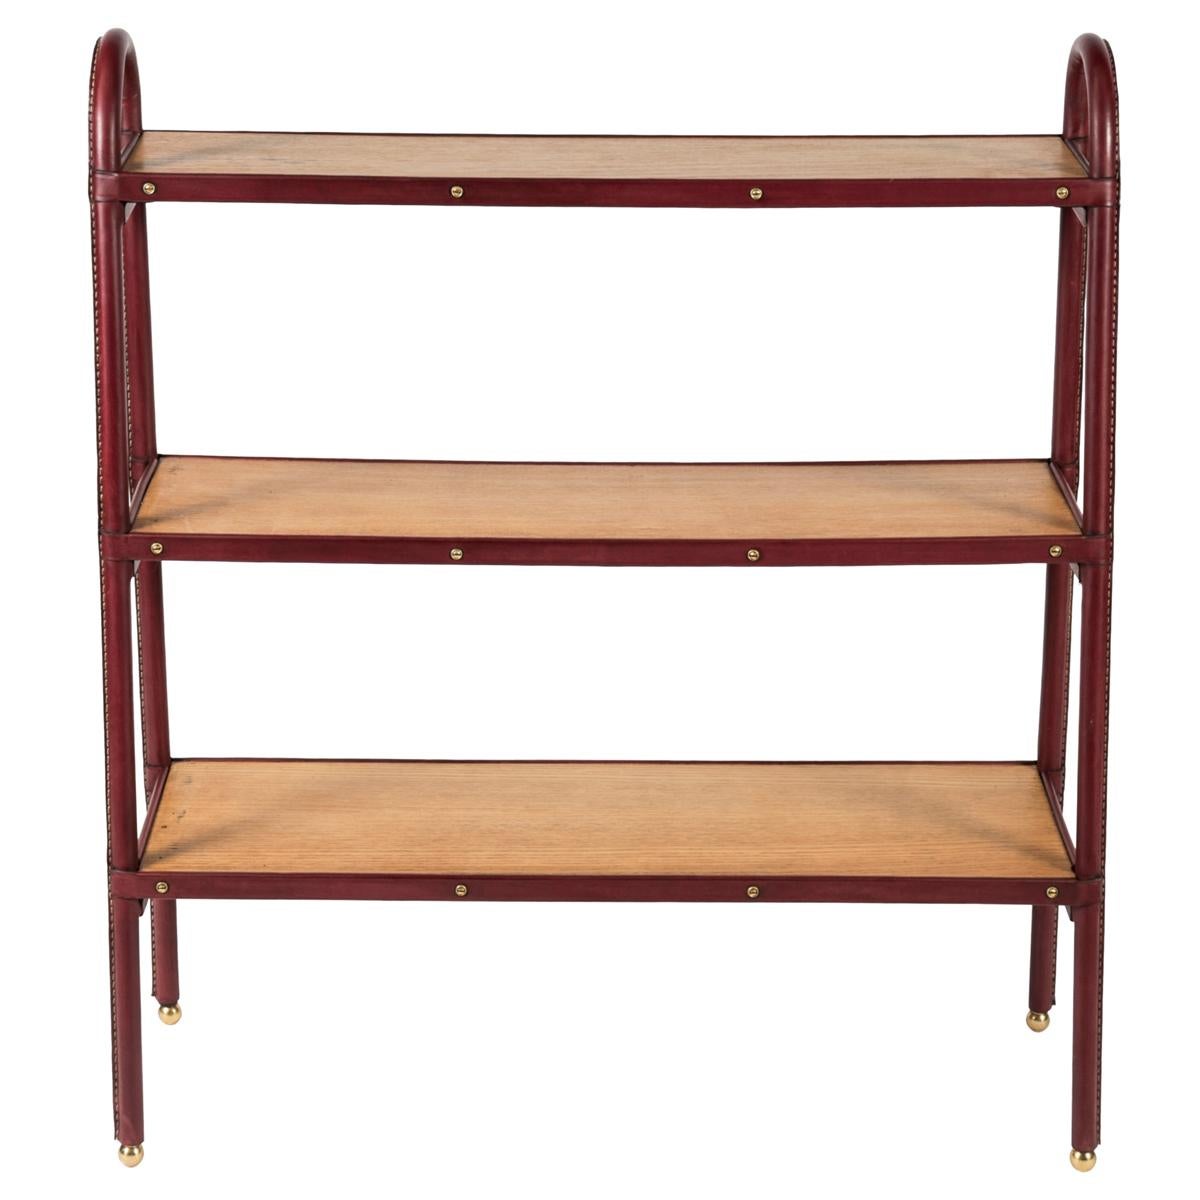 Stitched leather Bookrack by Jacques Adnet